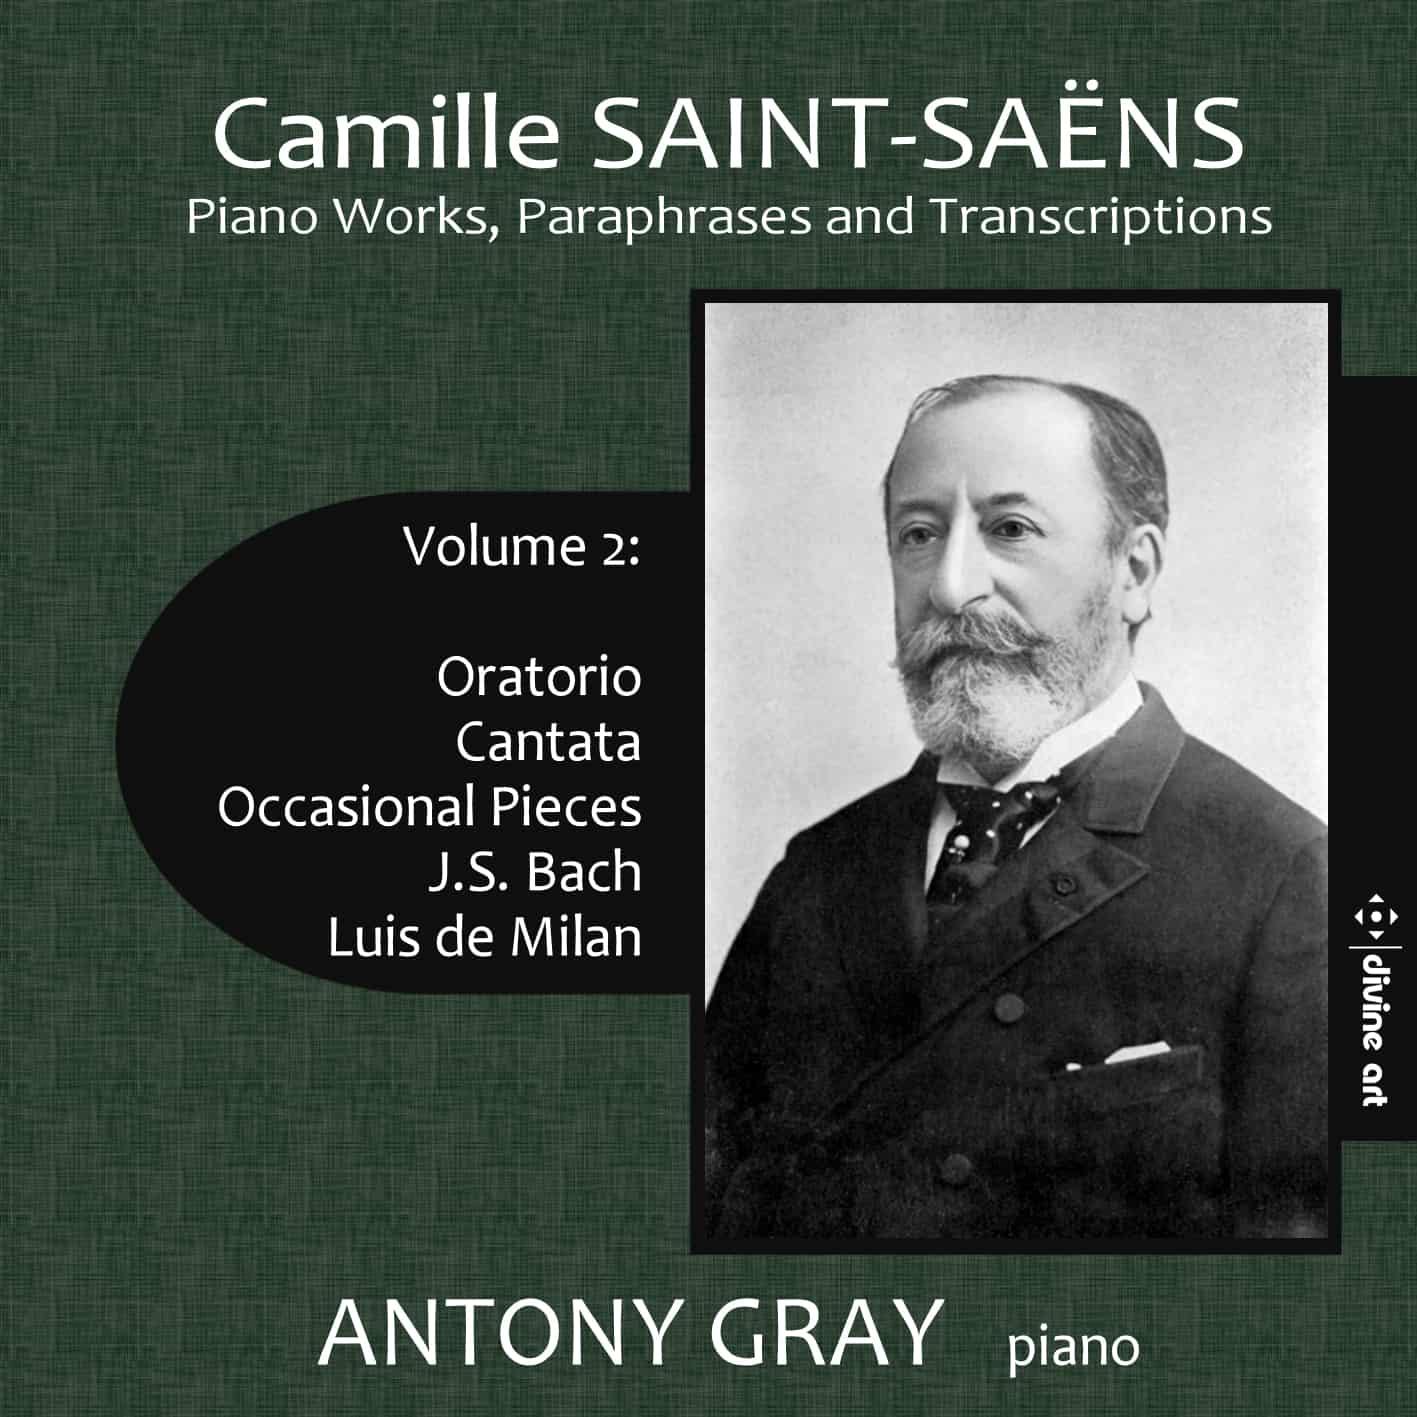 Camille Saint-Saëns: Works for Piano, Volume 2